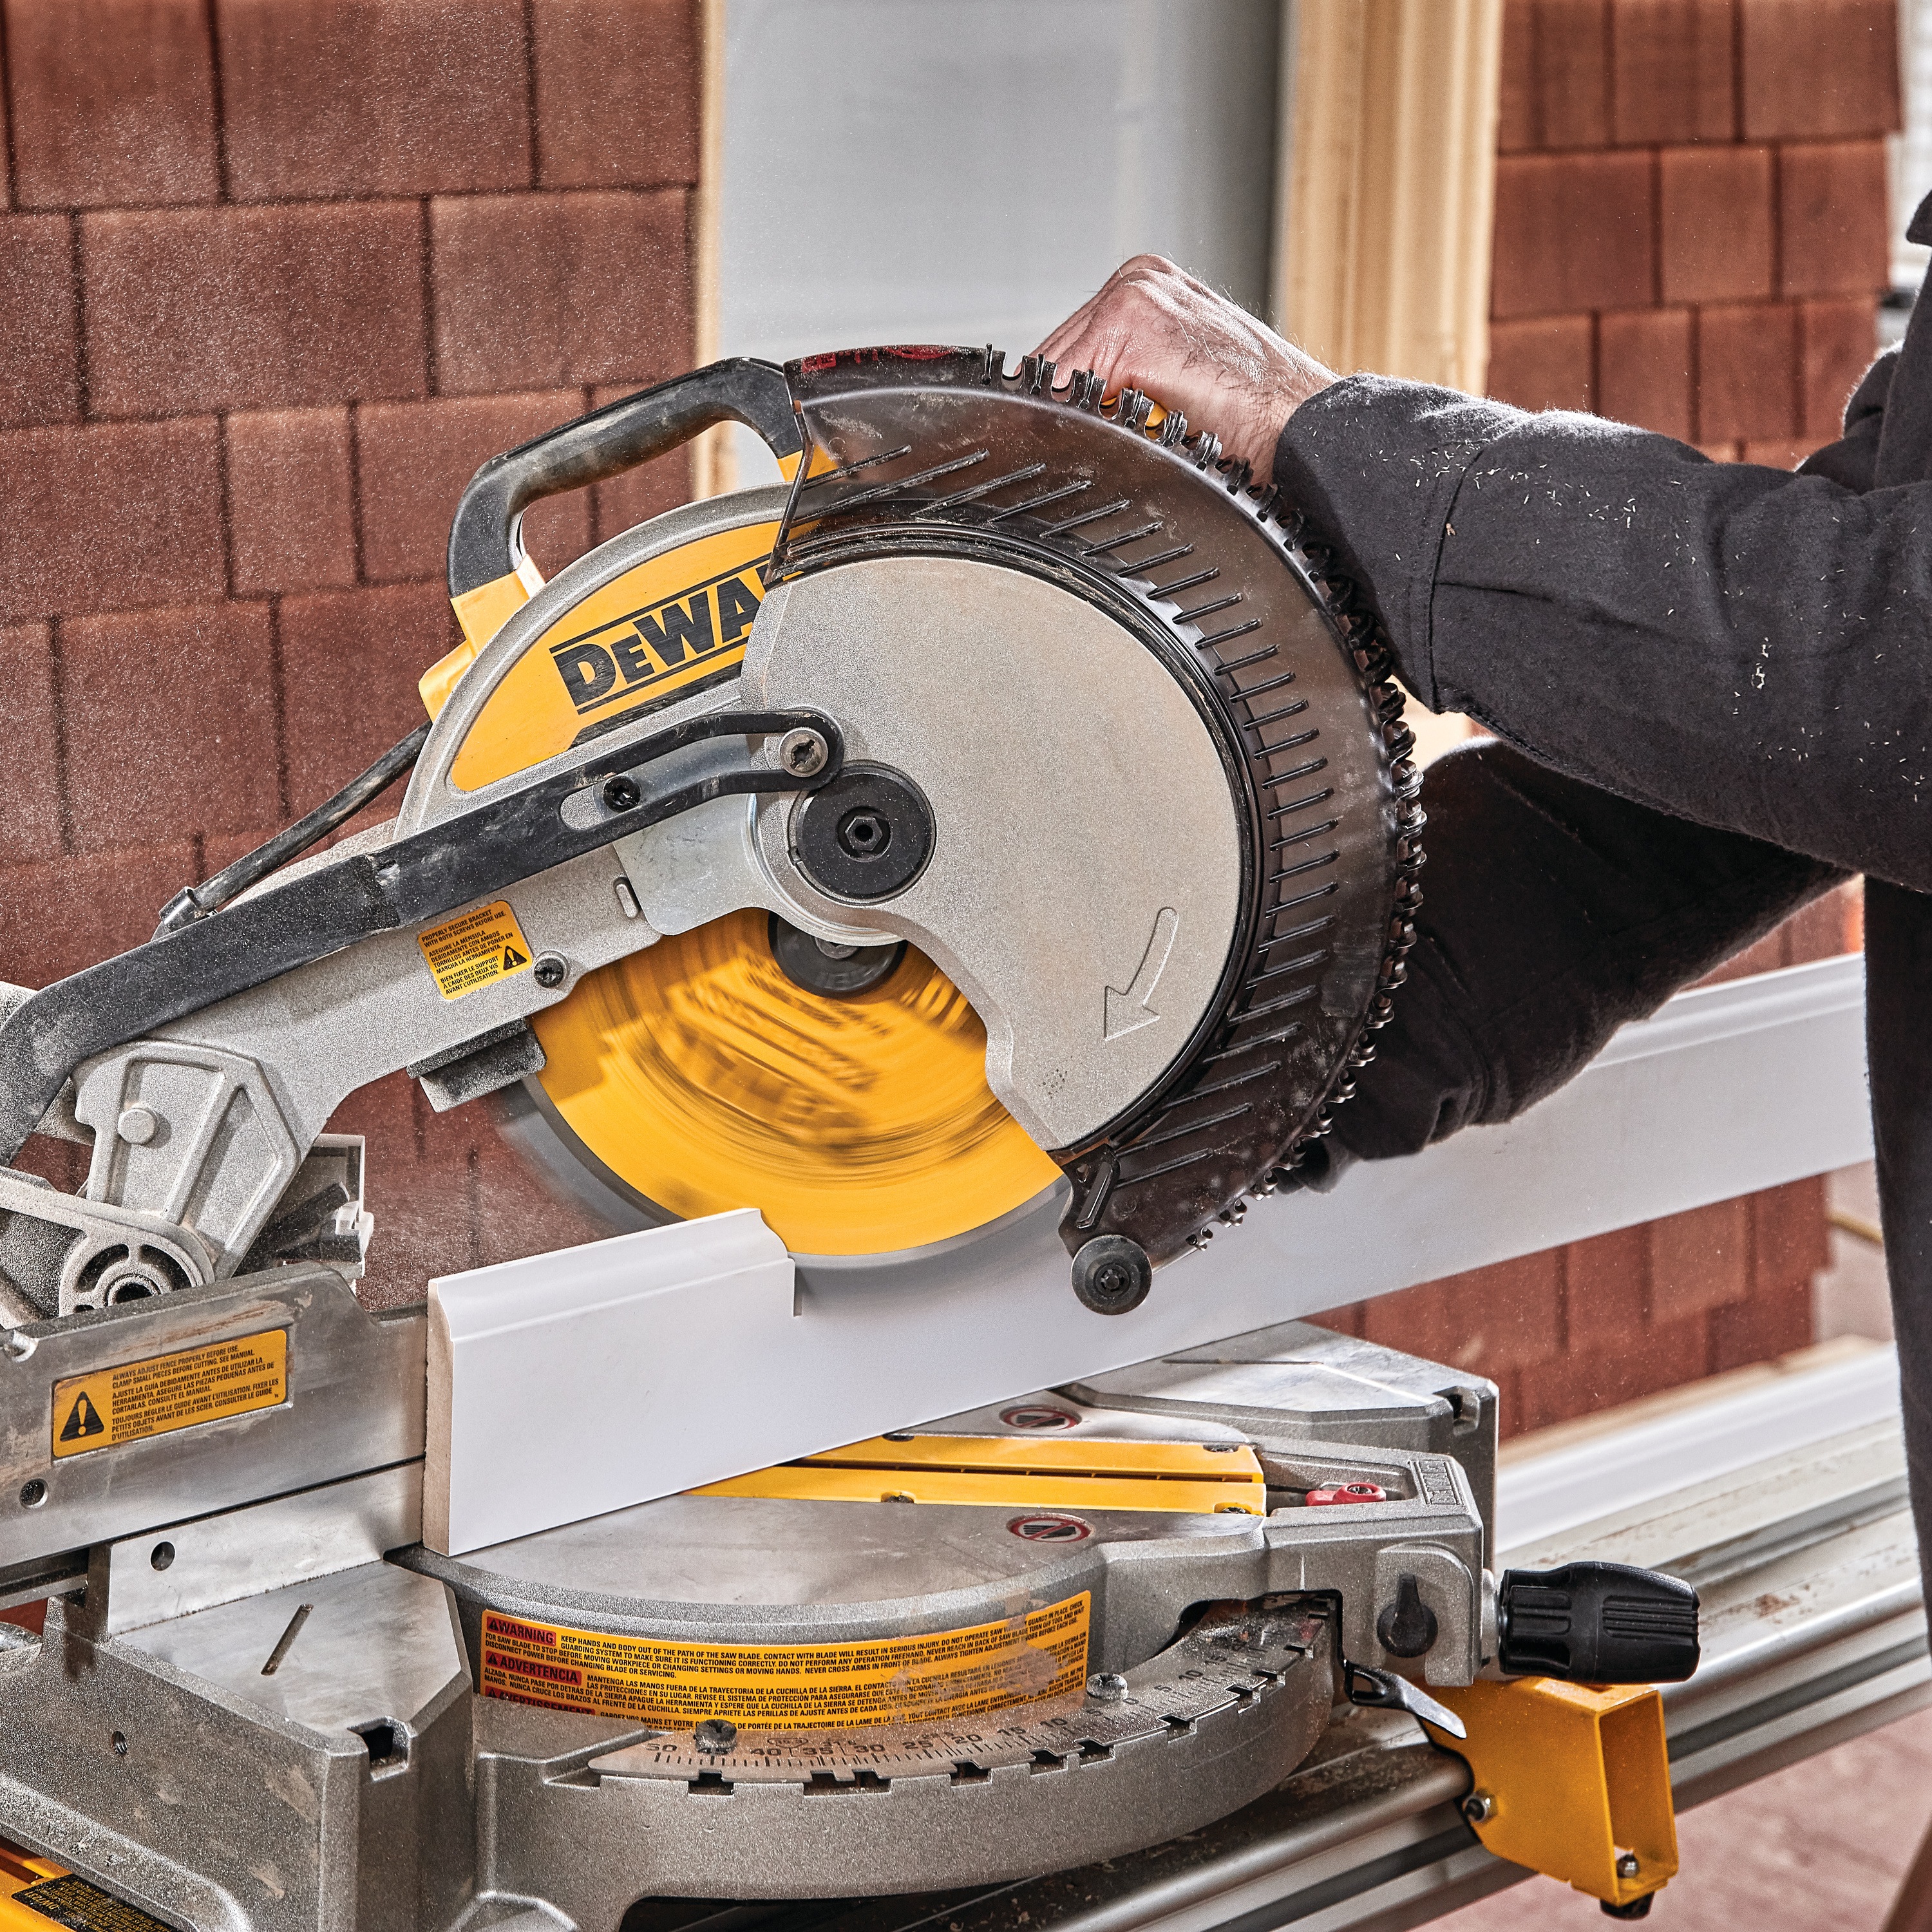 Electric single bevel compound miter saw being used to cut wood.